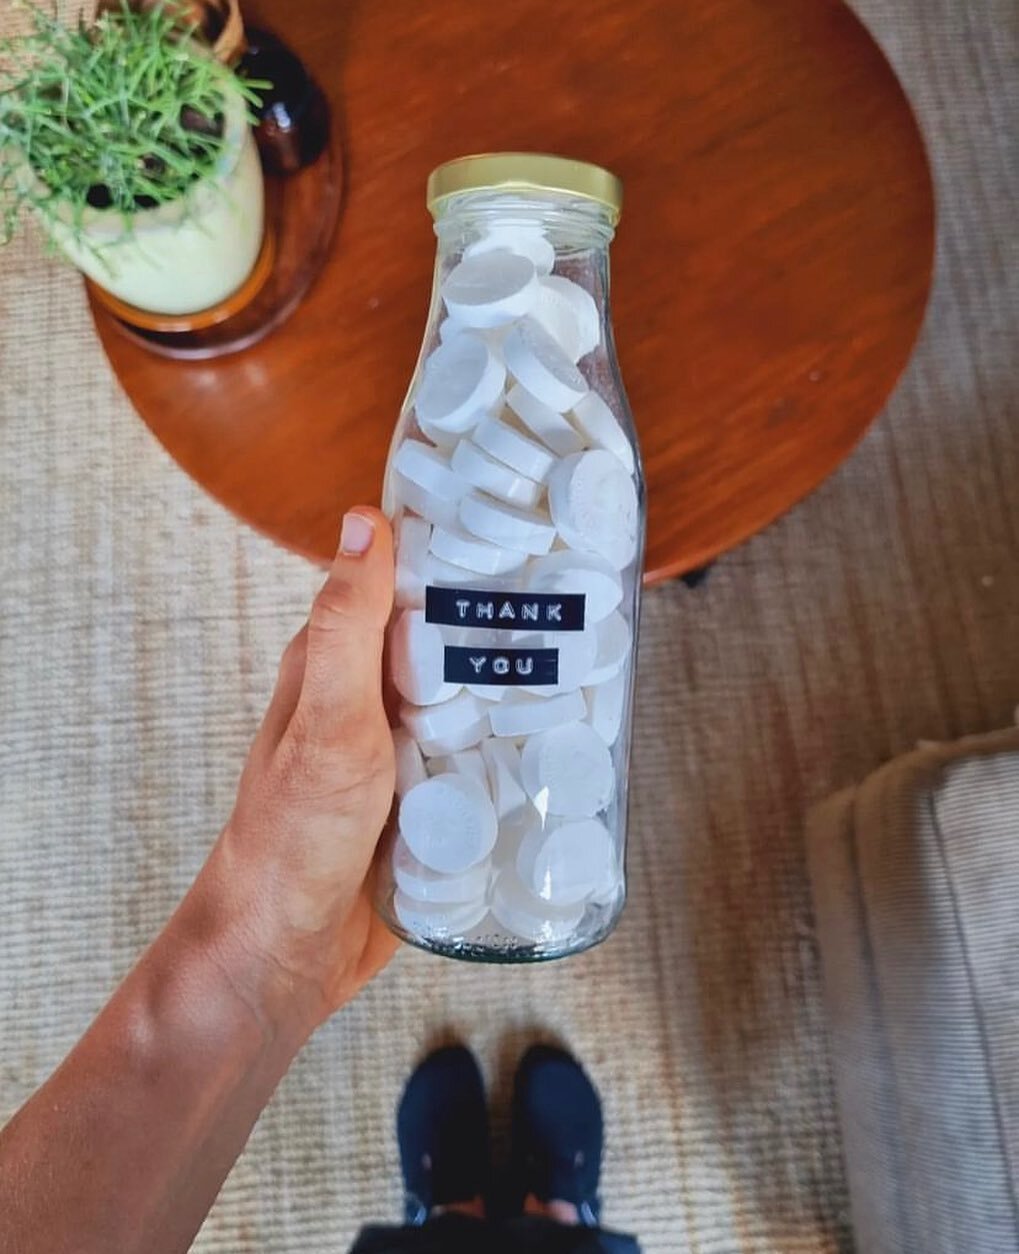 Looking for a simple and sustainable gift idea? 🎁  First, empty and thoroughly clean a glass bottle. Next, fill it with bulk bought vegan candies (or whatever your recipient will like). This homemade &quot;thank-you&quot; gift is a great low-waste w